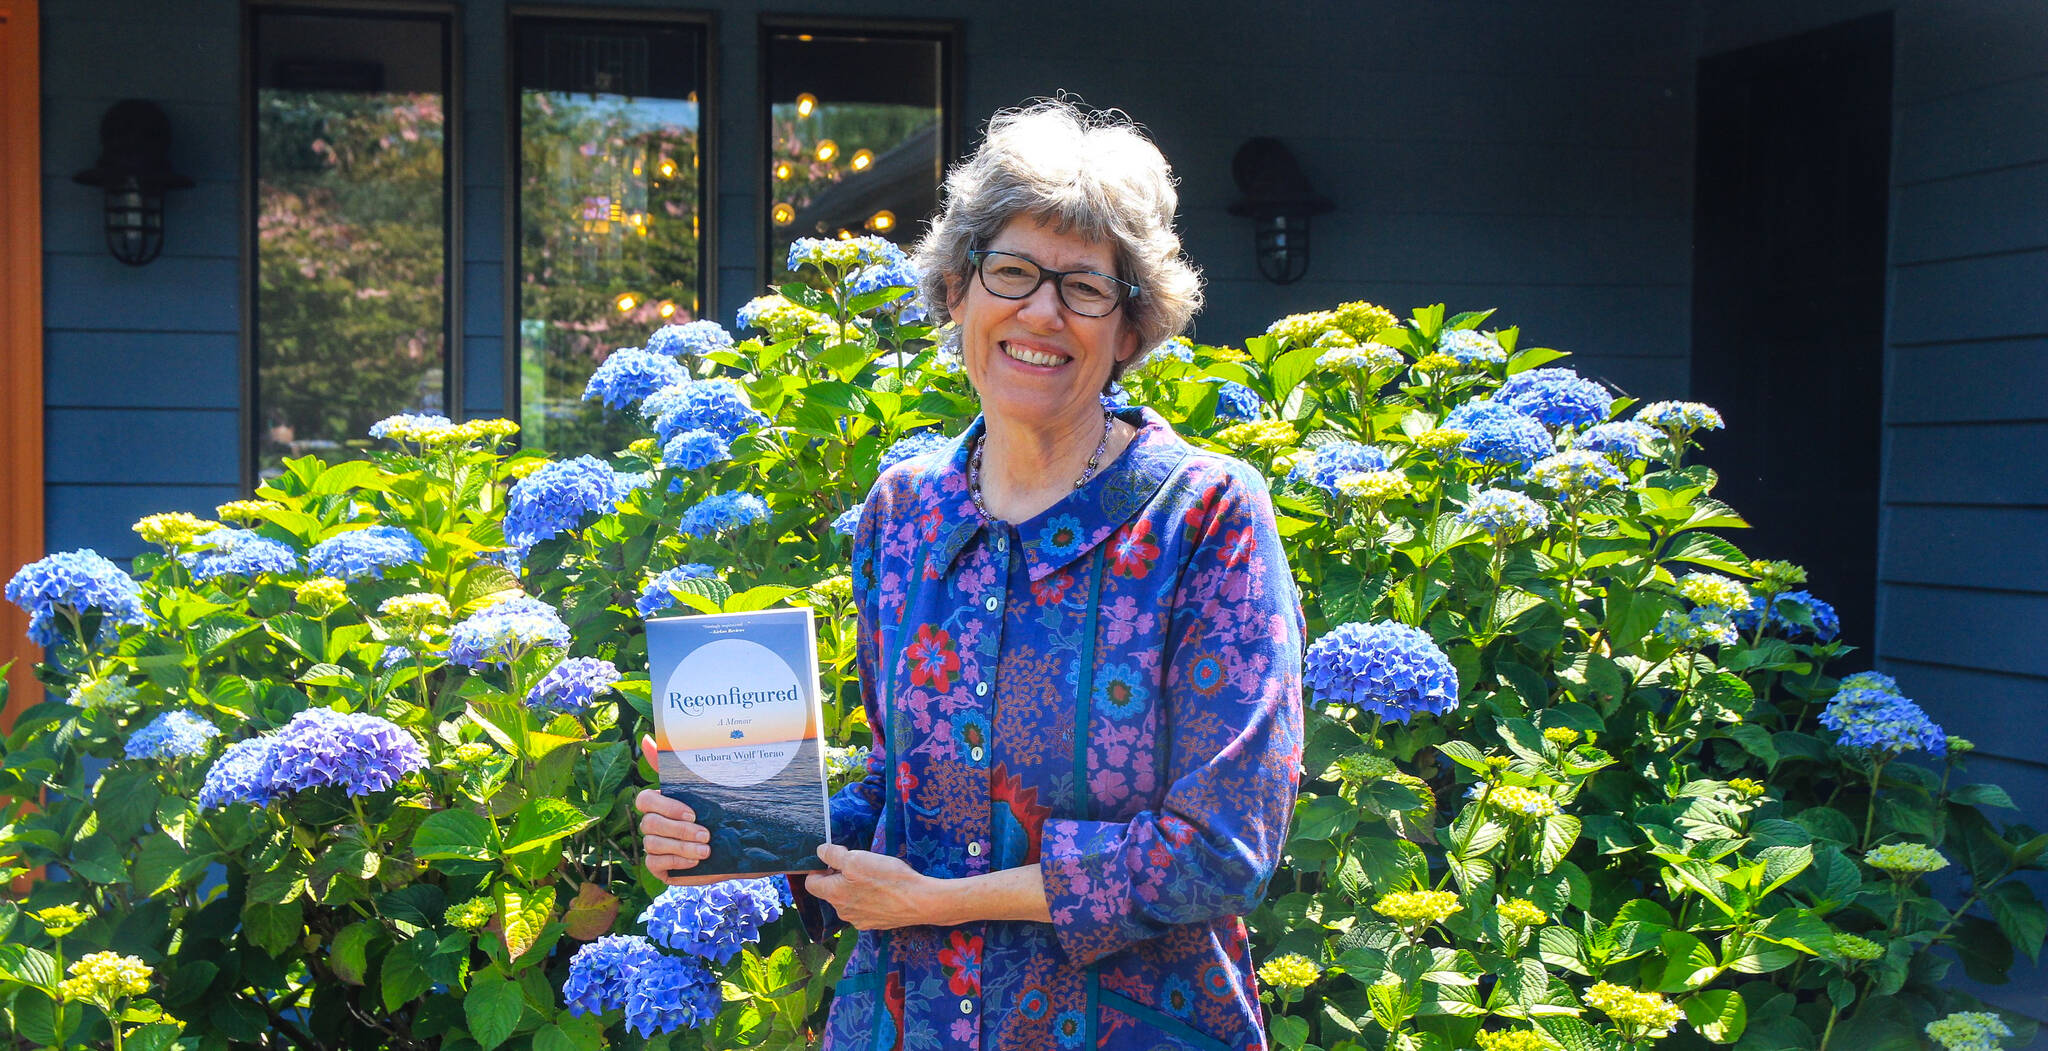 Barbara Wolf Terao holds her memoir, Reconfigured, in front of her house in Freeland. (Photo by Luisa Loi)